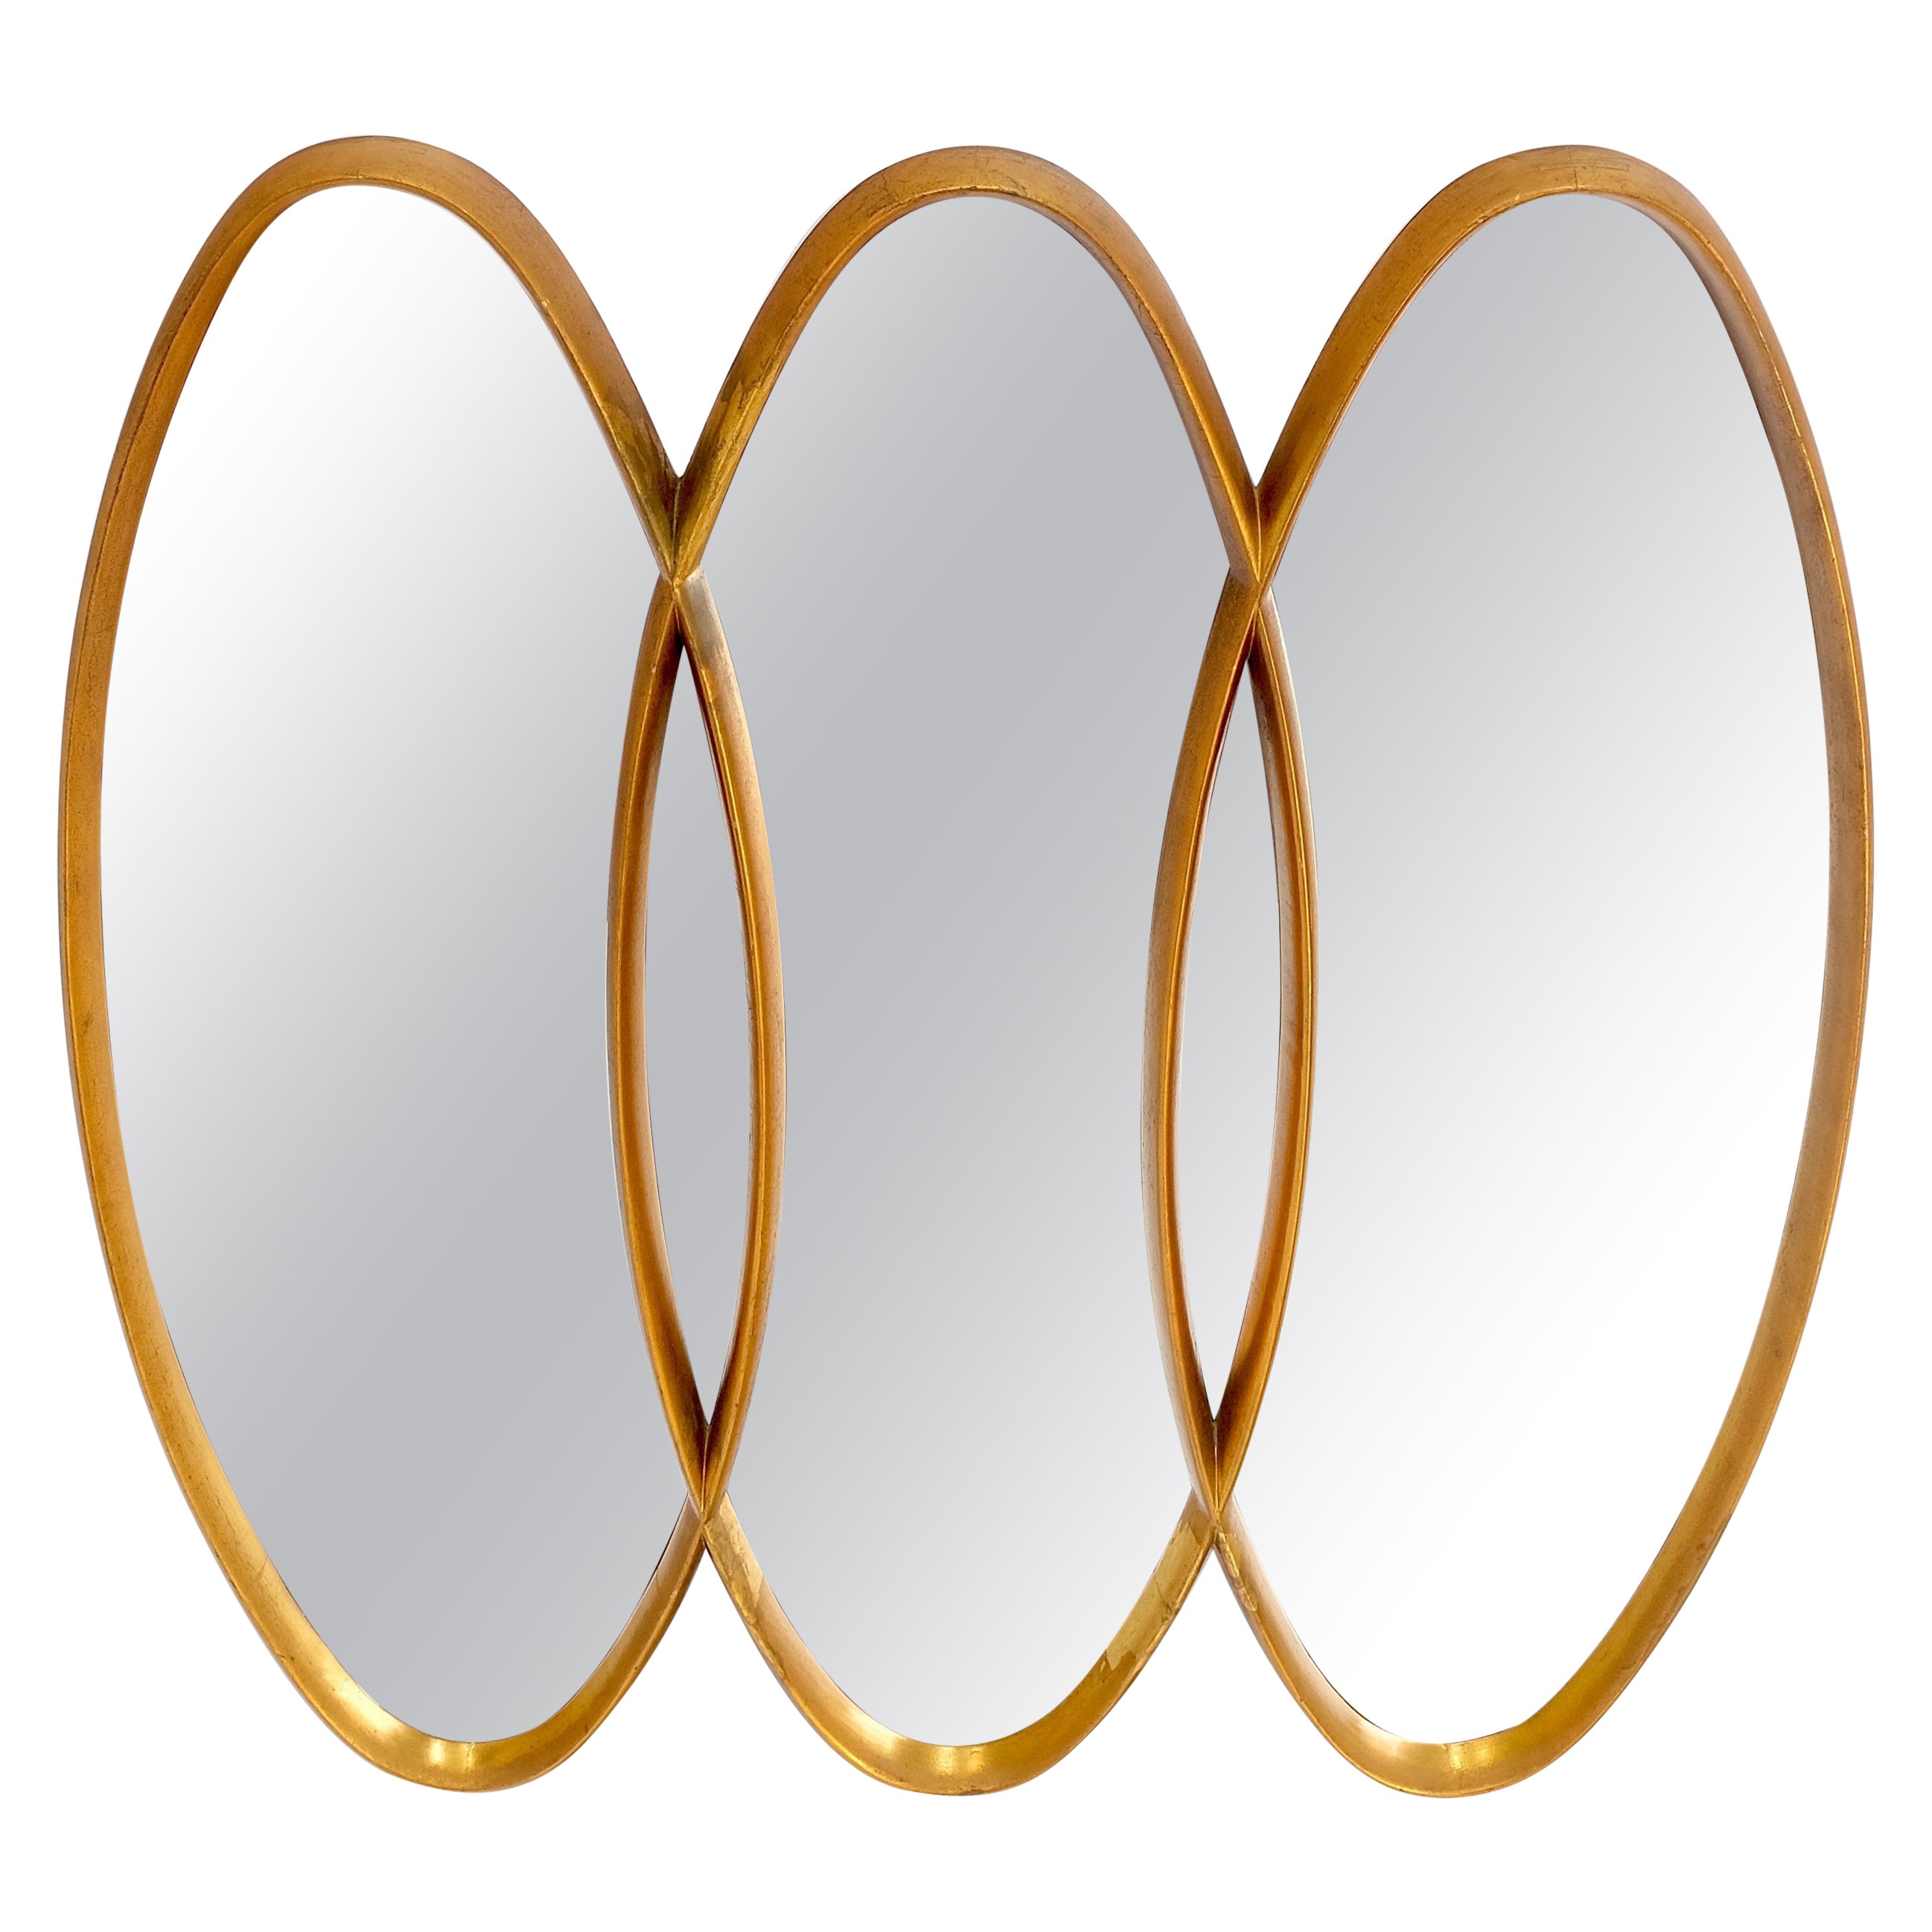 Mid-Century Modern Tripple Overlapping Carved Wood Ovals Gold Gilt Wall Mirror